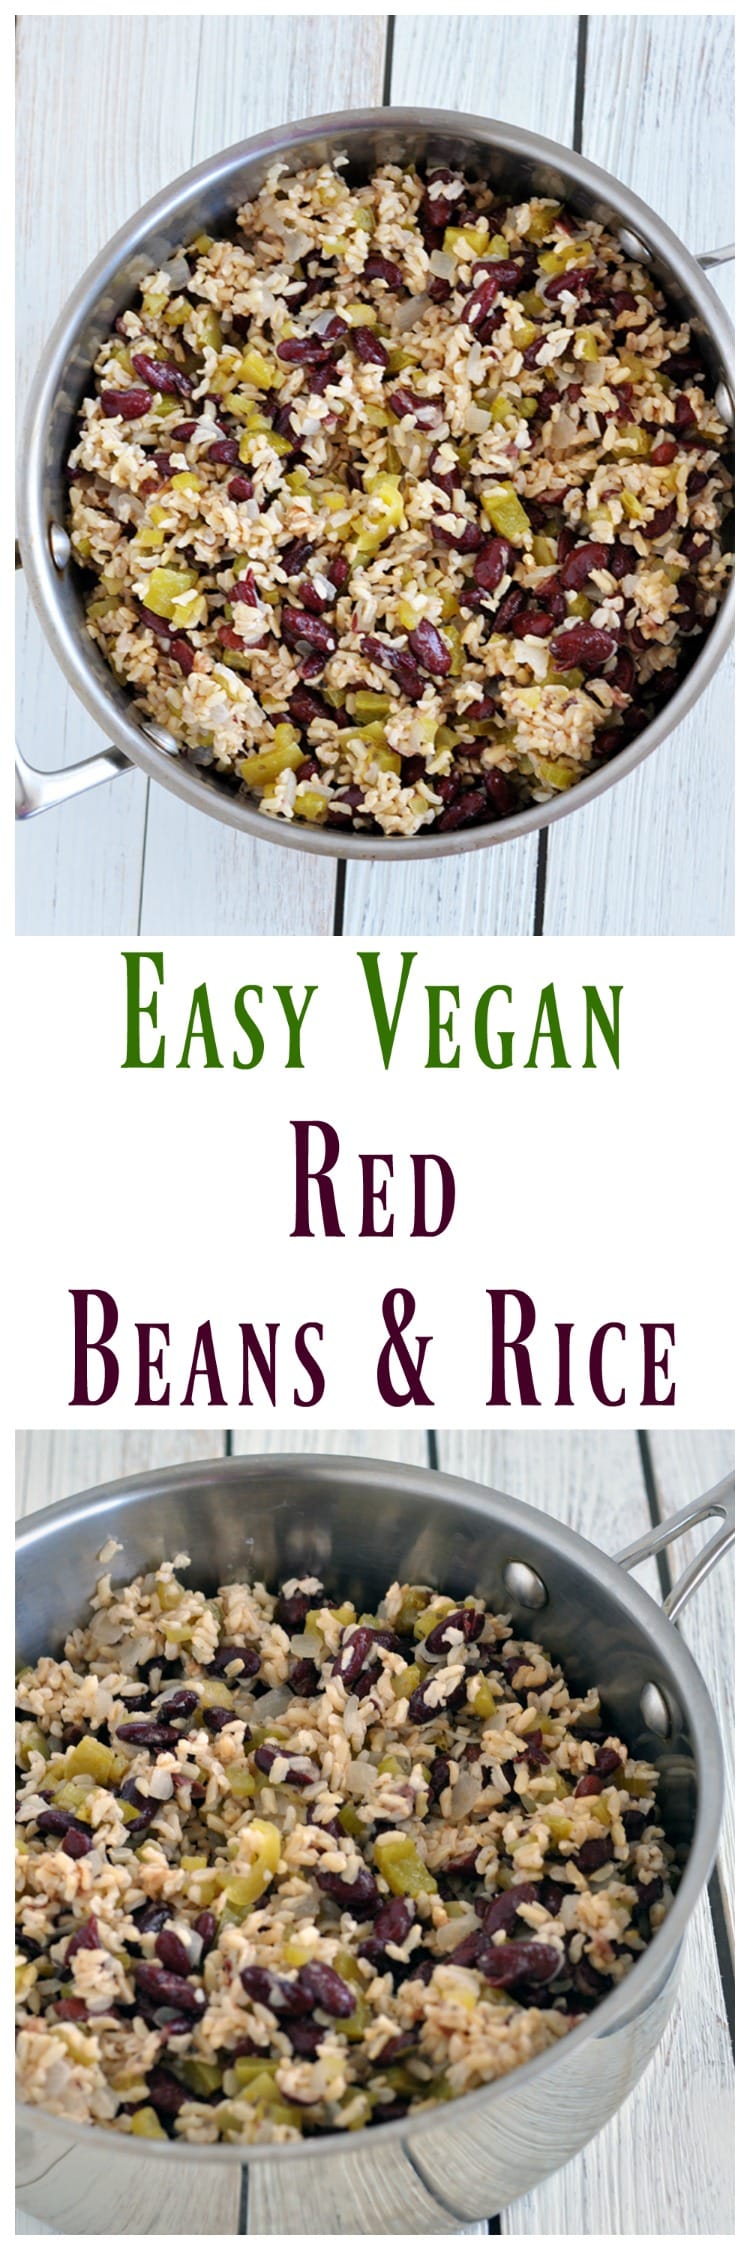 Red Beans and Rice (Vegan and Gluten Free) - My Whole Food Life